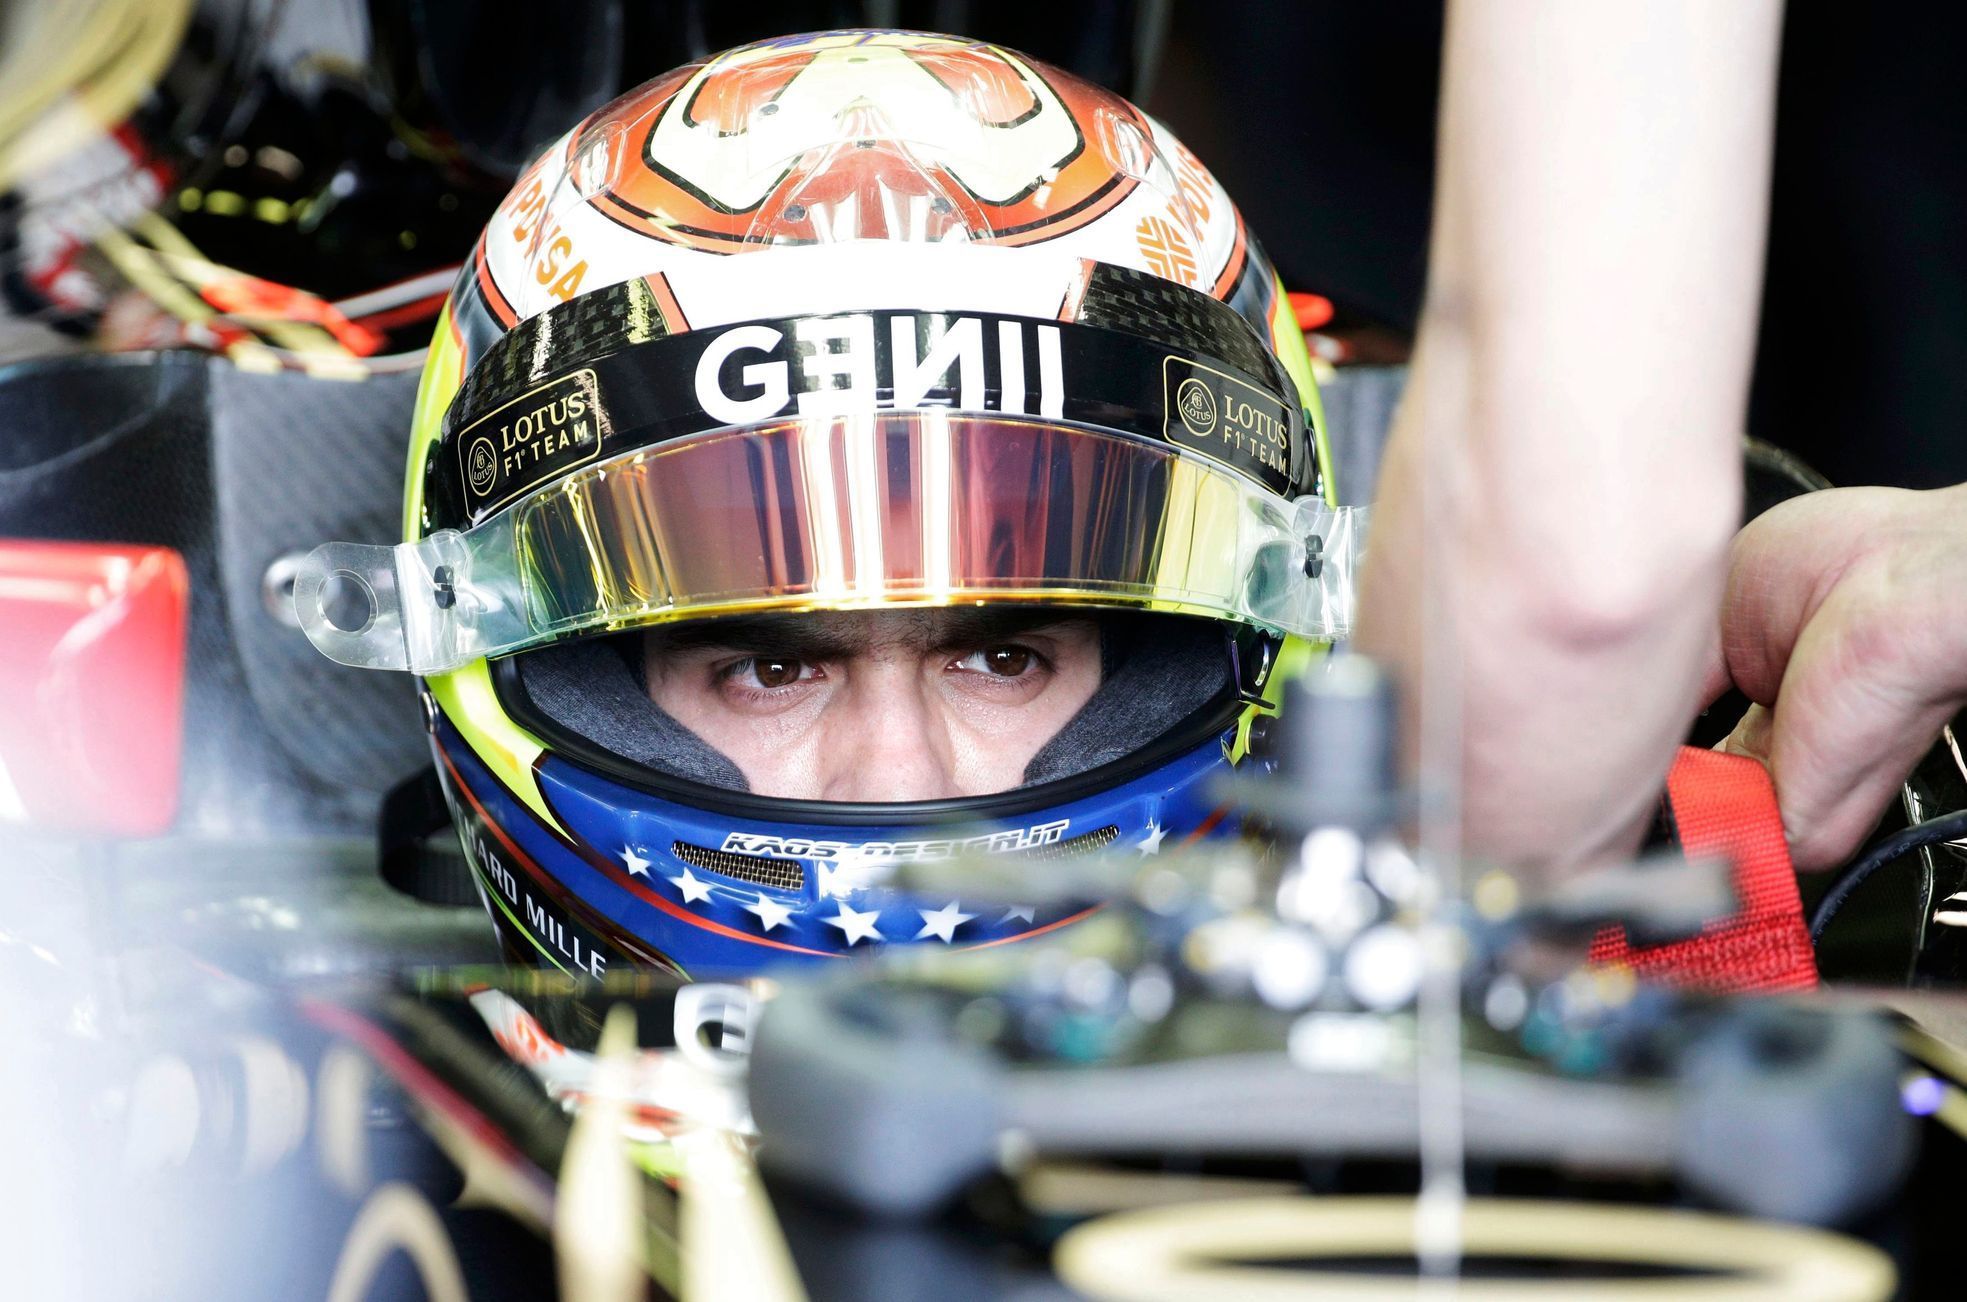 Lotus Formula One driver Pastor Maldonado of Venezuela sit in his car in the team garage during the third practice session of the Australian F1 Grand Prix at the Albert Park circuit in Melbourne